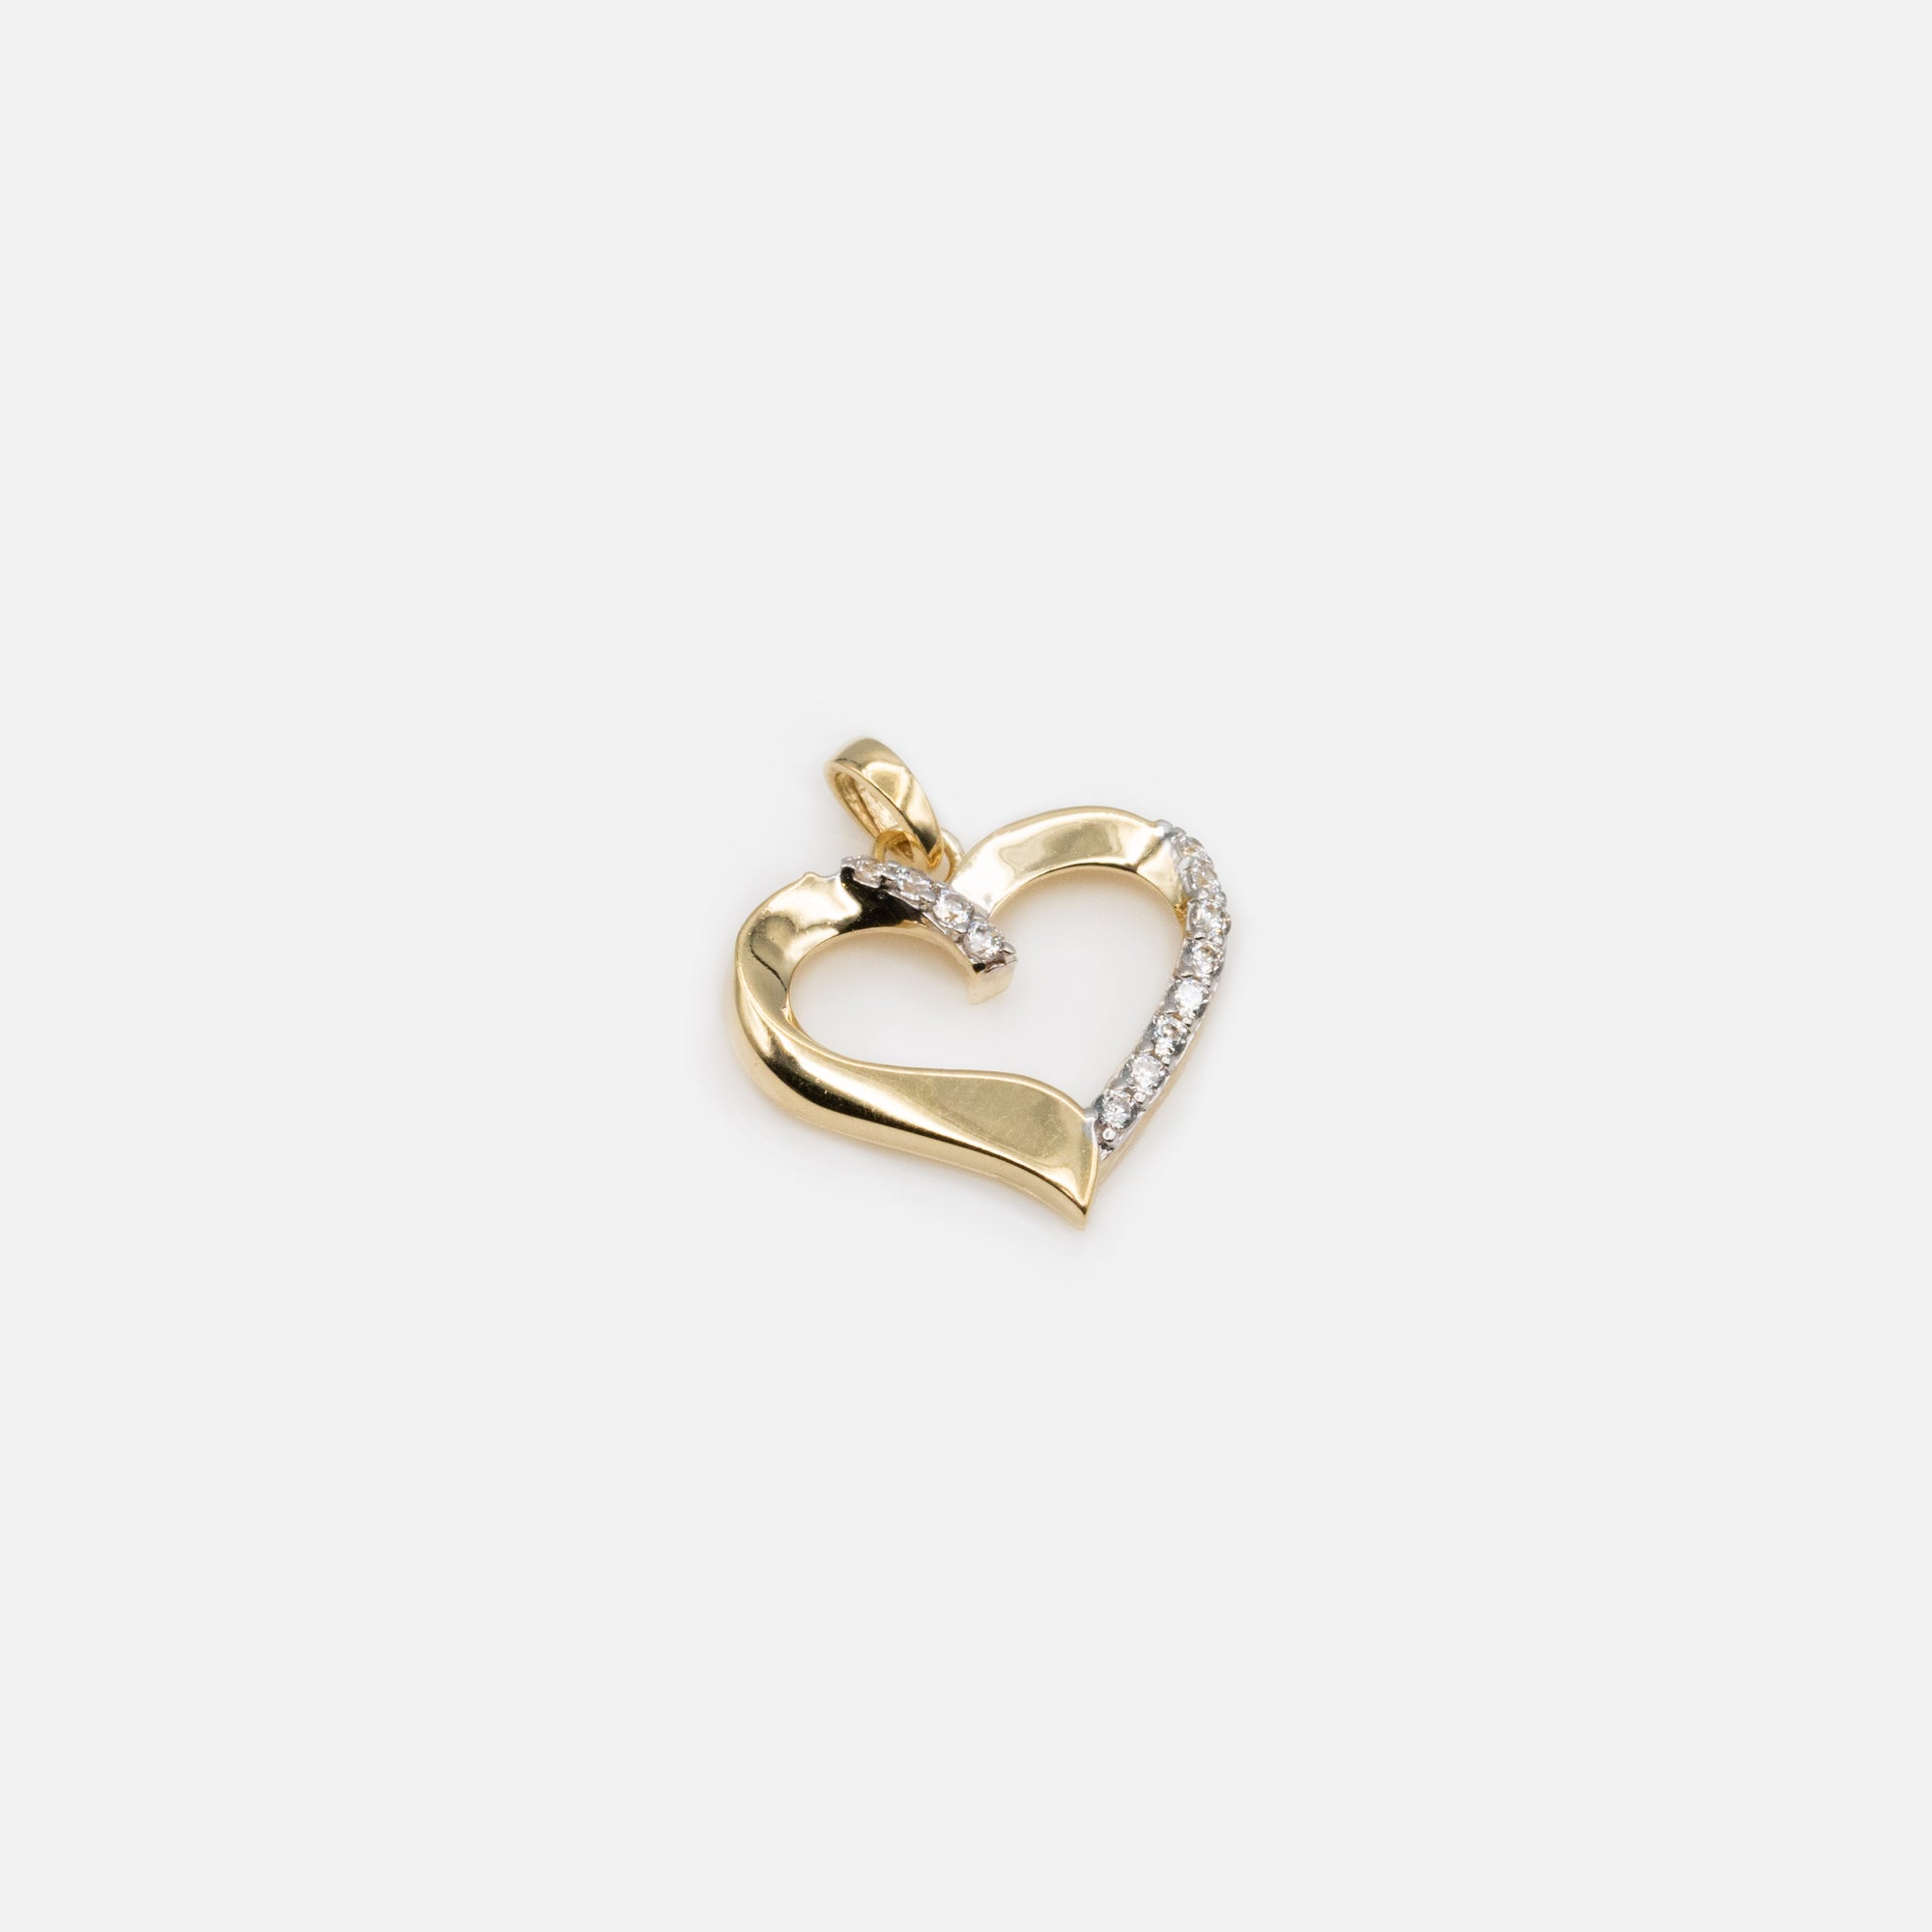 Chunky Heart Charm with Cubic Zirconia in 10k Gold